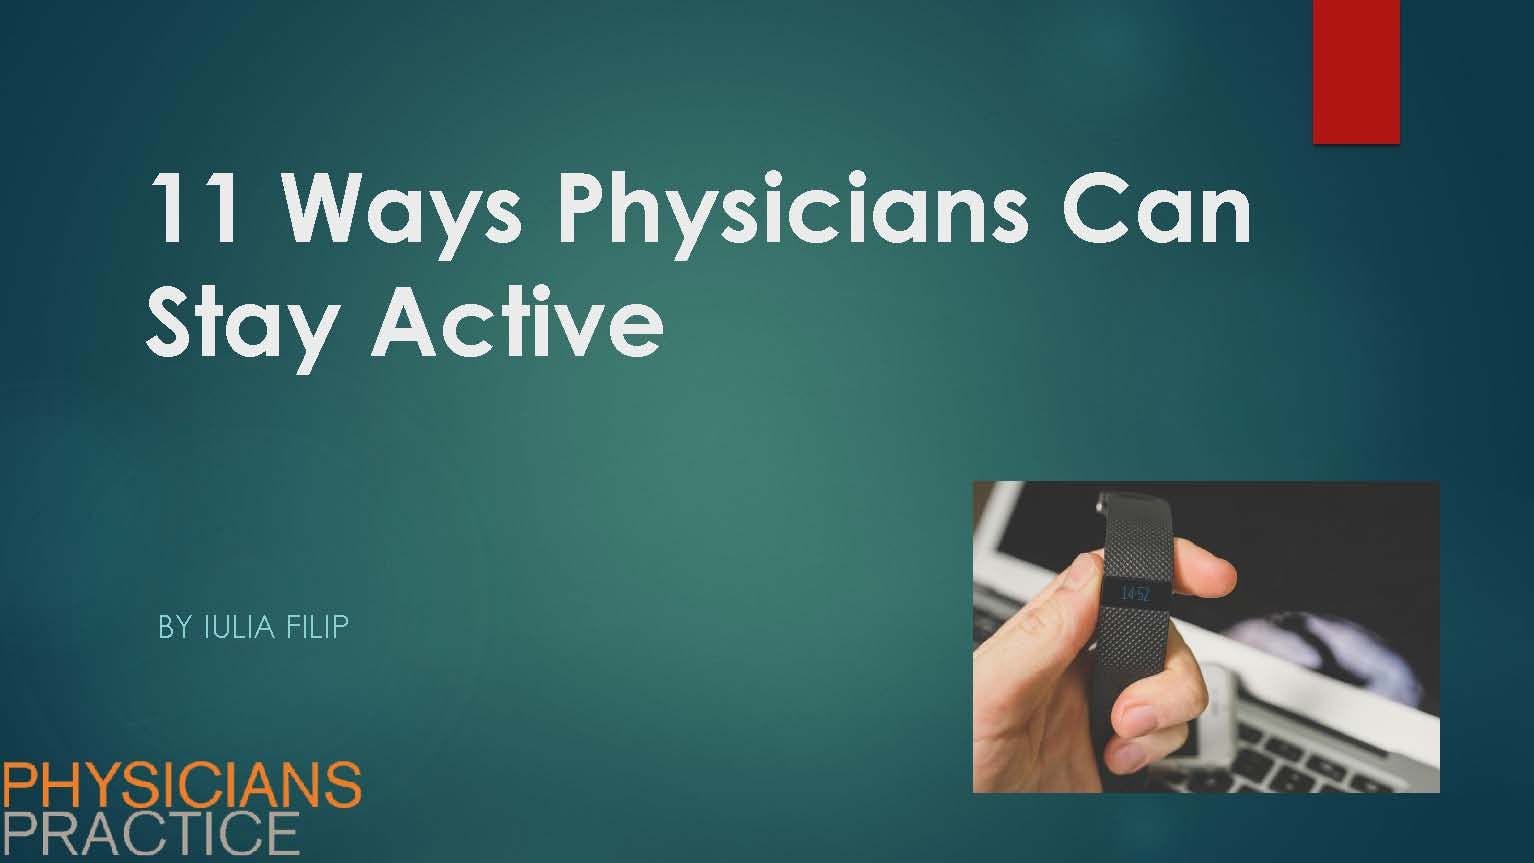 11 Ways Physicians Can Stay Active